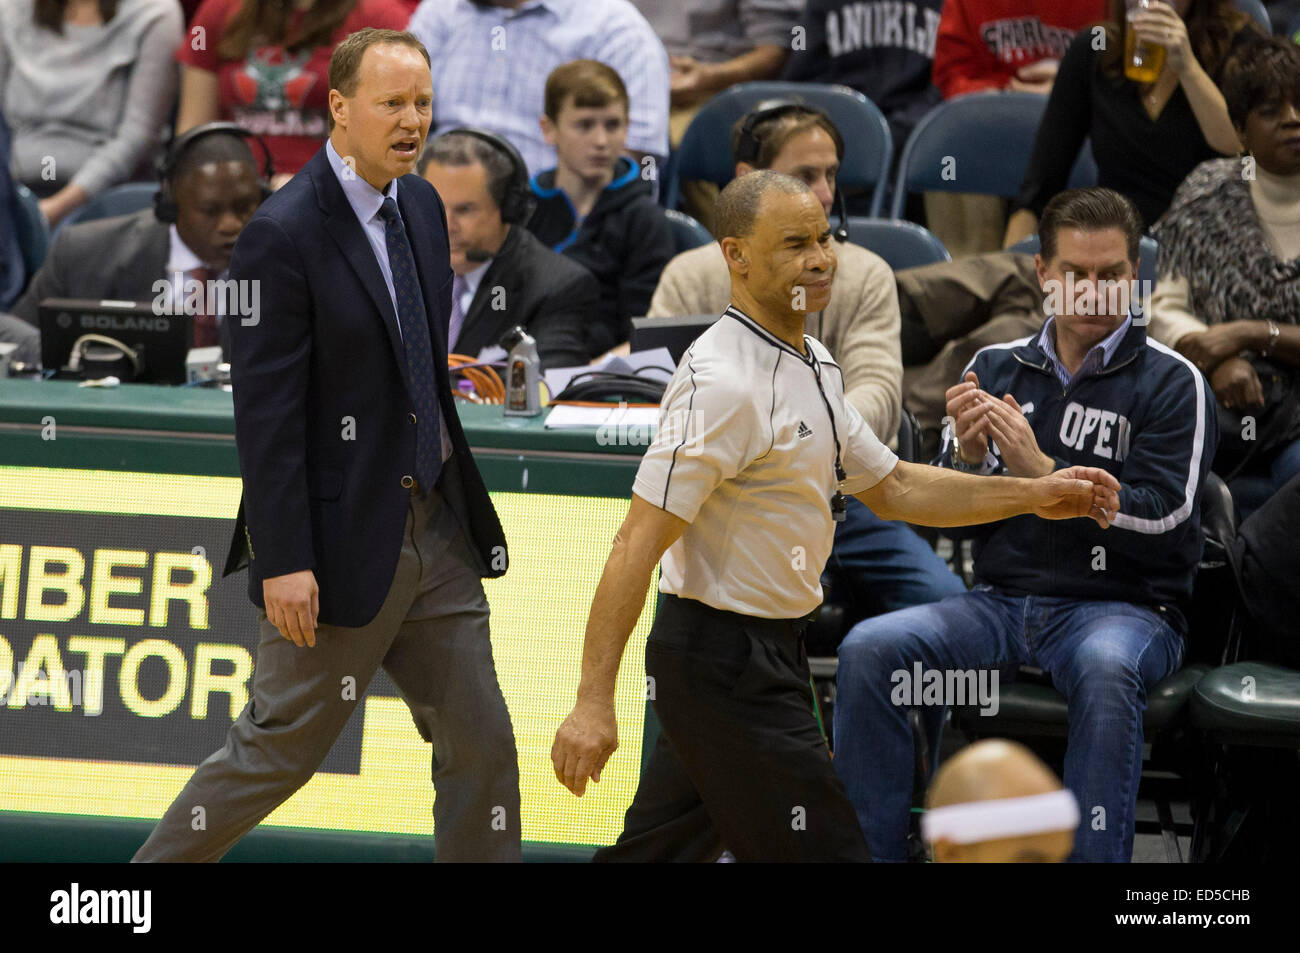 Milwaukee, WI, USA. 27th Dec, 2014. Atlanta Head Coach Mike Budenhoizer questions a call with Referee Danny Crawford during the NBA game between the Atlanta Hawks and the Milwaukee Bucks at the BMO Harris Bradley Center in Milwaukee, WI. Atlanta defeated Milwaukee 90-85. John Fisher/CSM/Alamy Live News Stock Photo